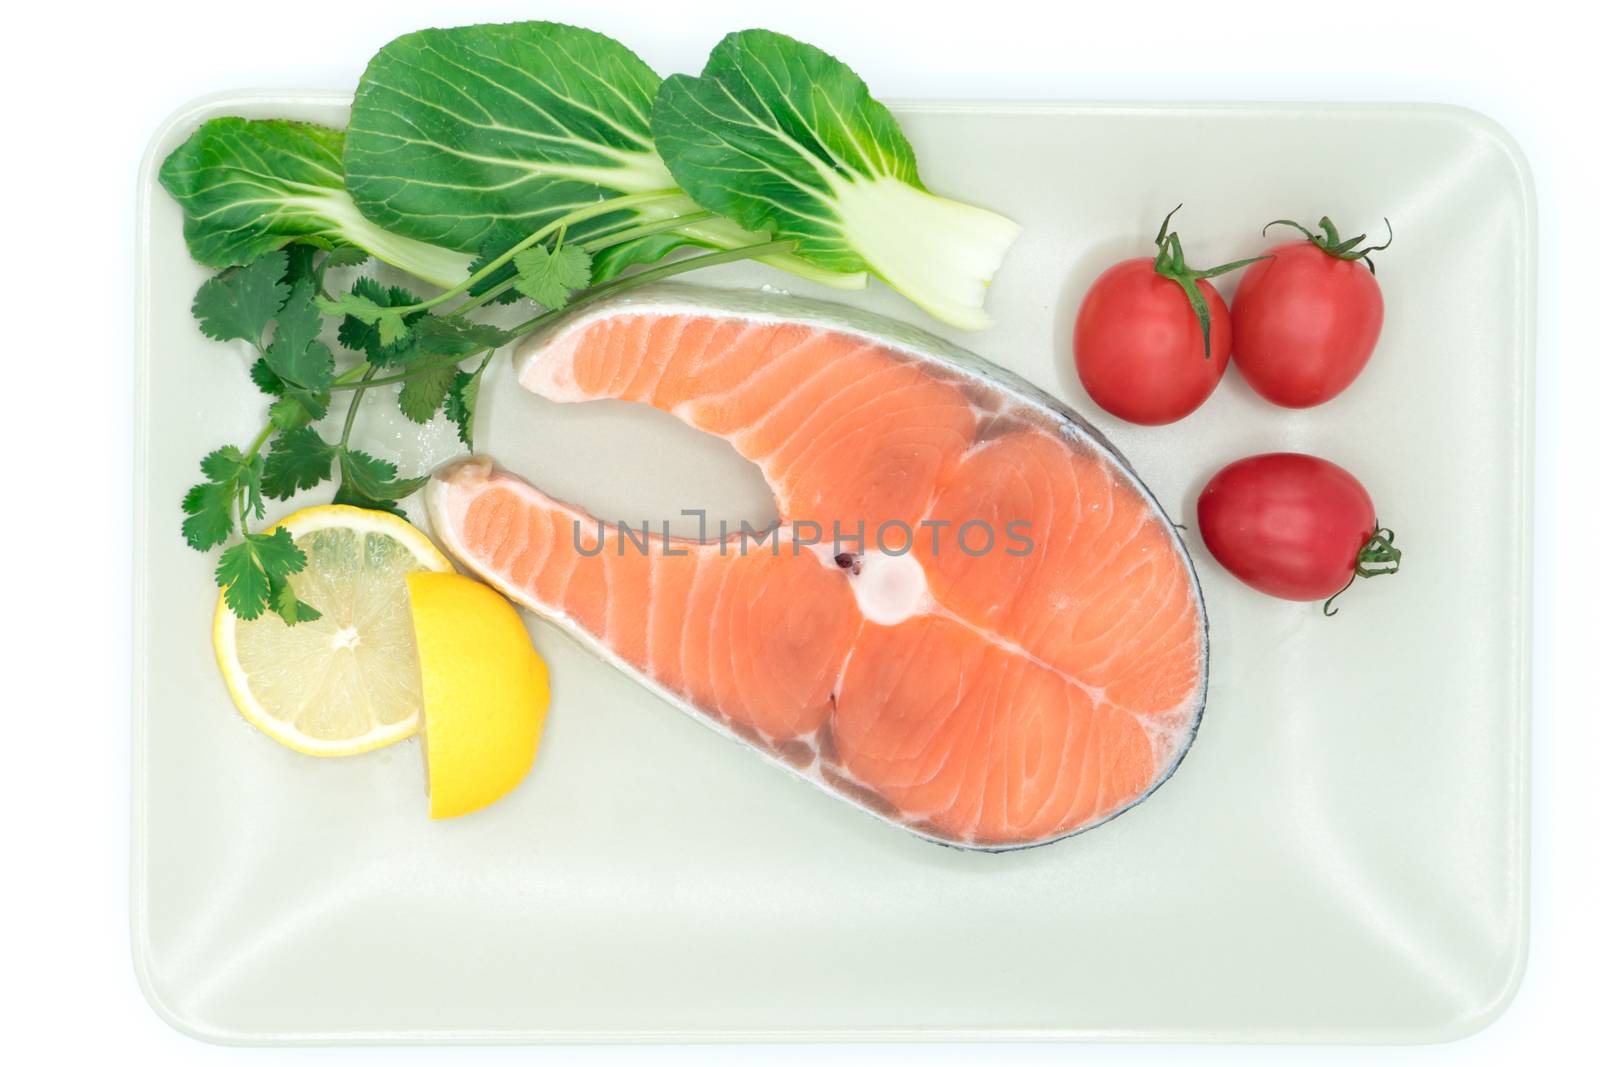 raw salmon steak with vegetable on plate, food and vegetable con by psodaz